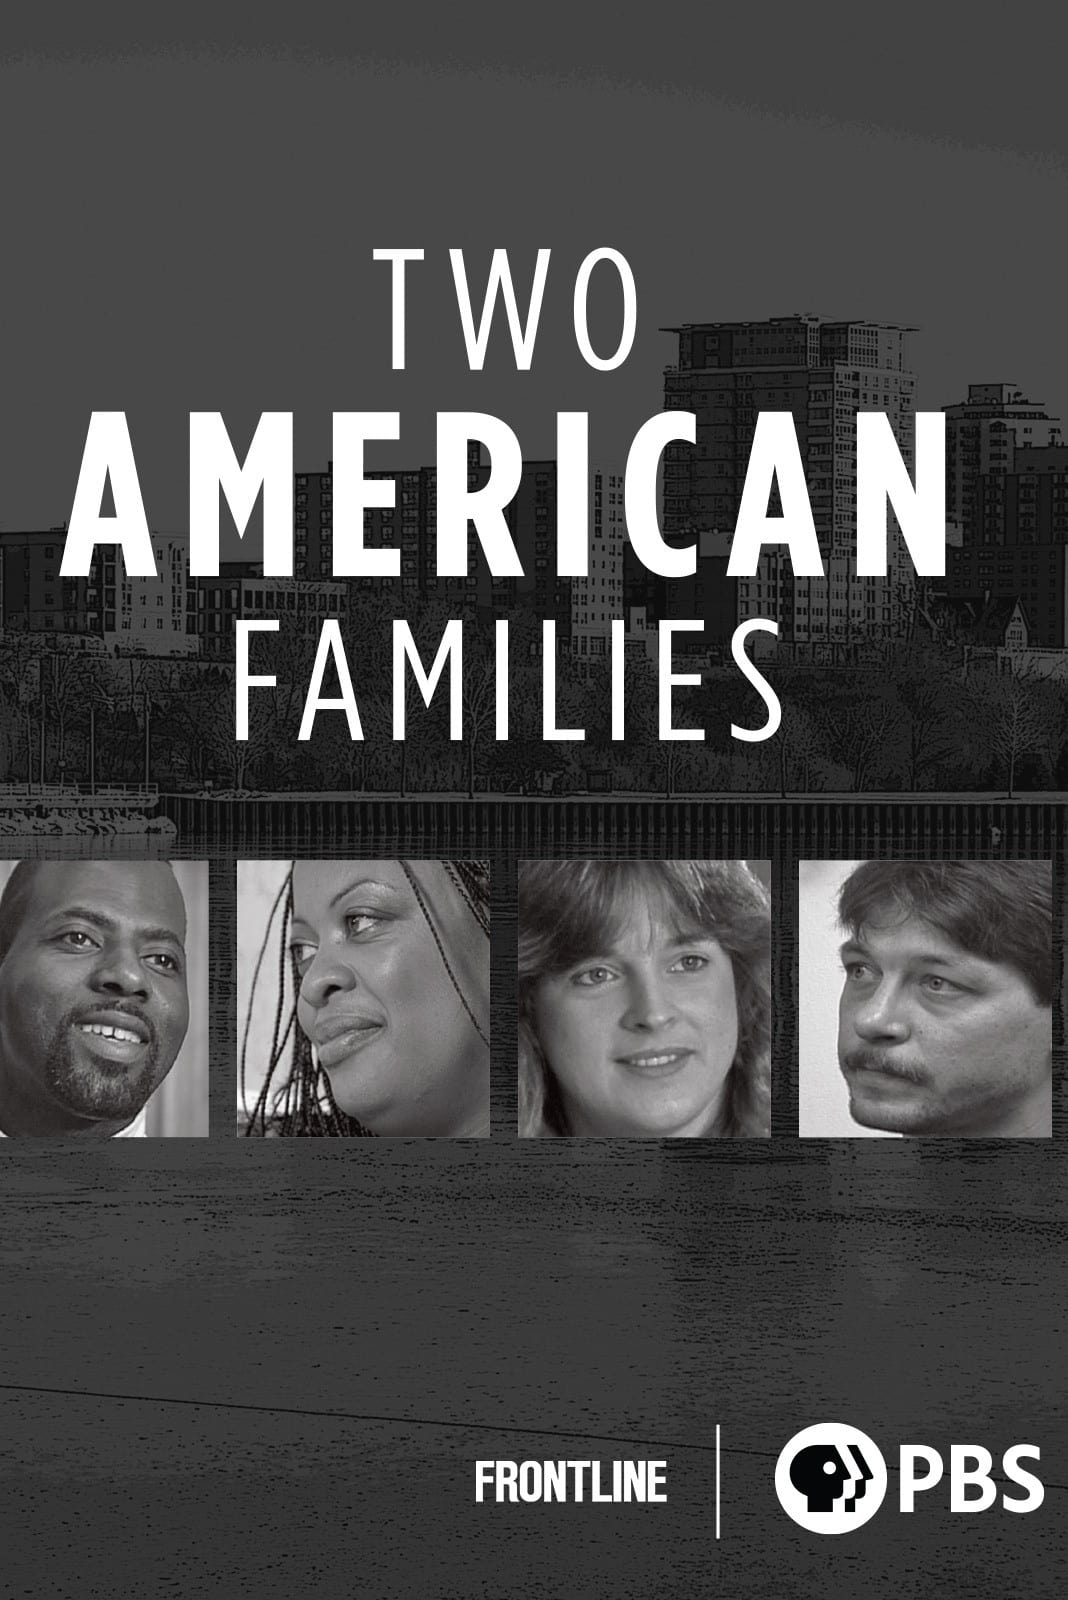 Two American Families